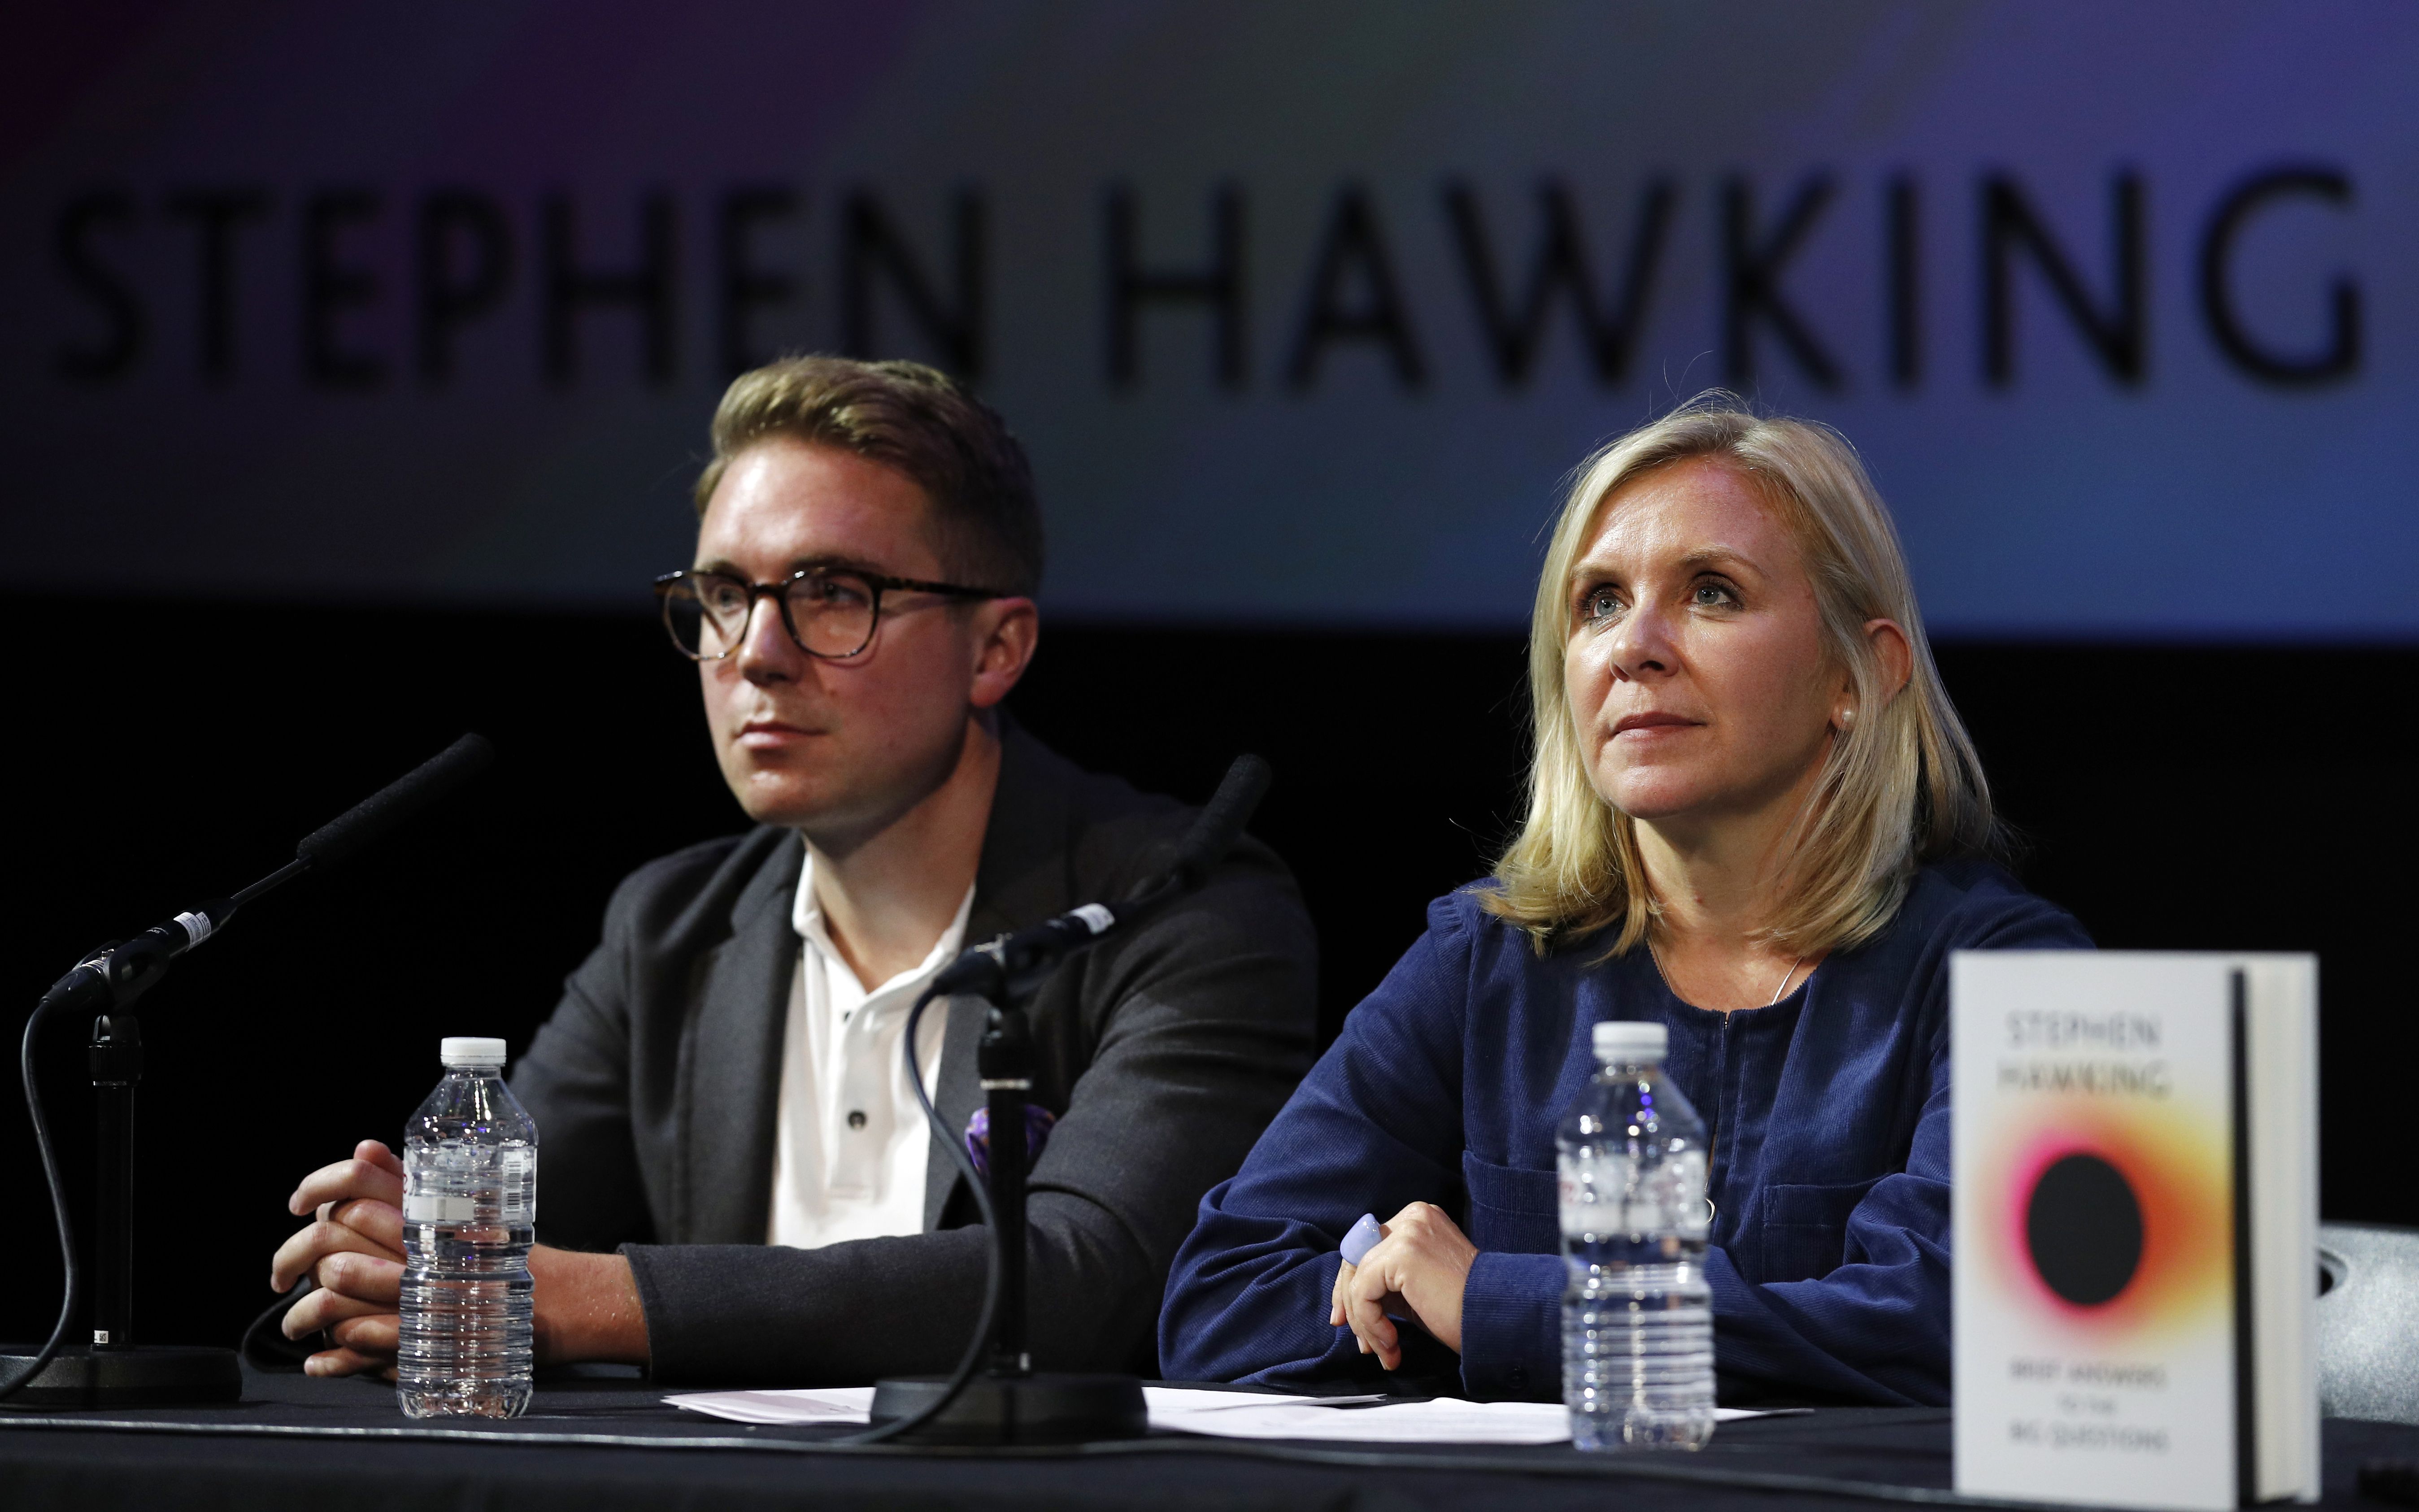 Timothy and Lucy Hawking are photographed during an interview at the global launch of Stephen Hawking's final book, "Brief Answers to the Brief Questions," at the Science Museum on October 15, 2018, in London | Source: Getty Images